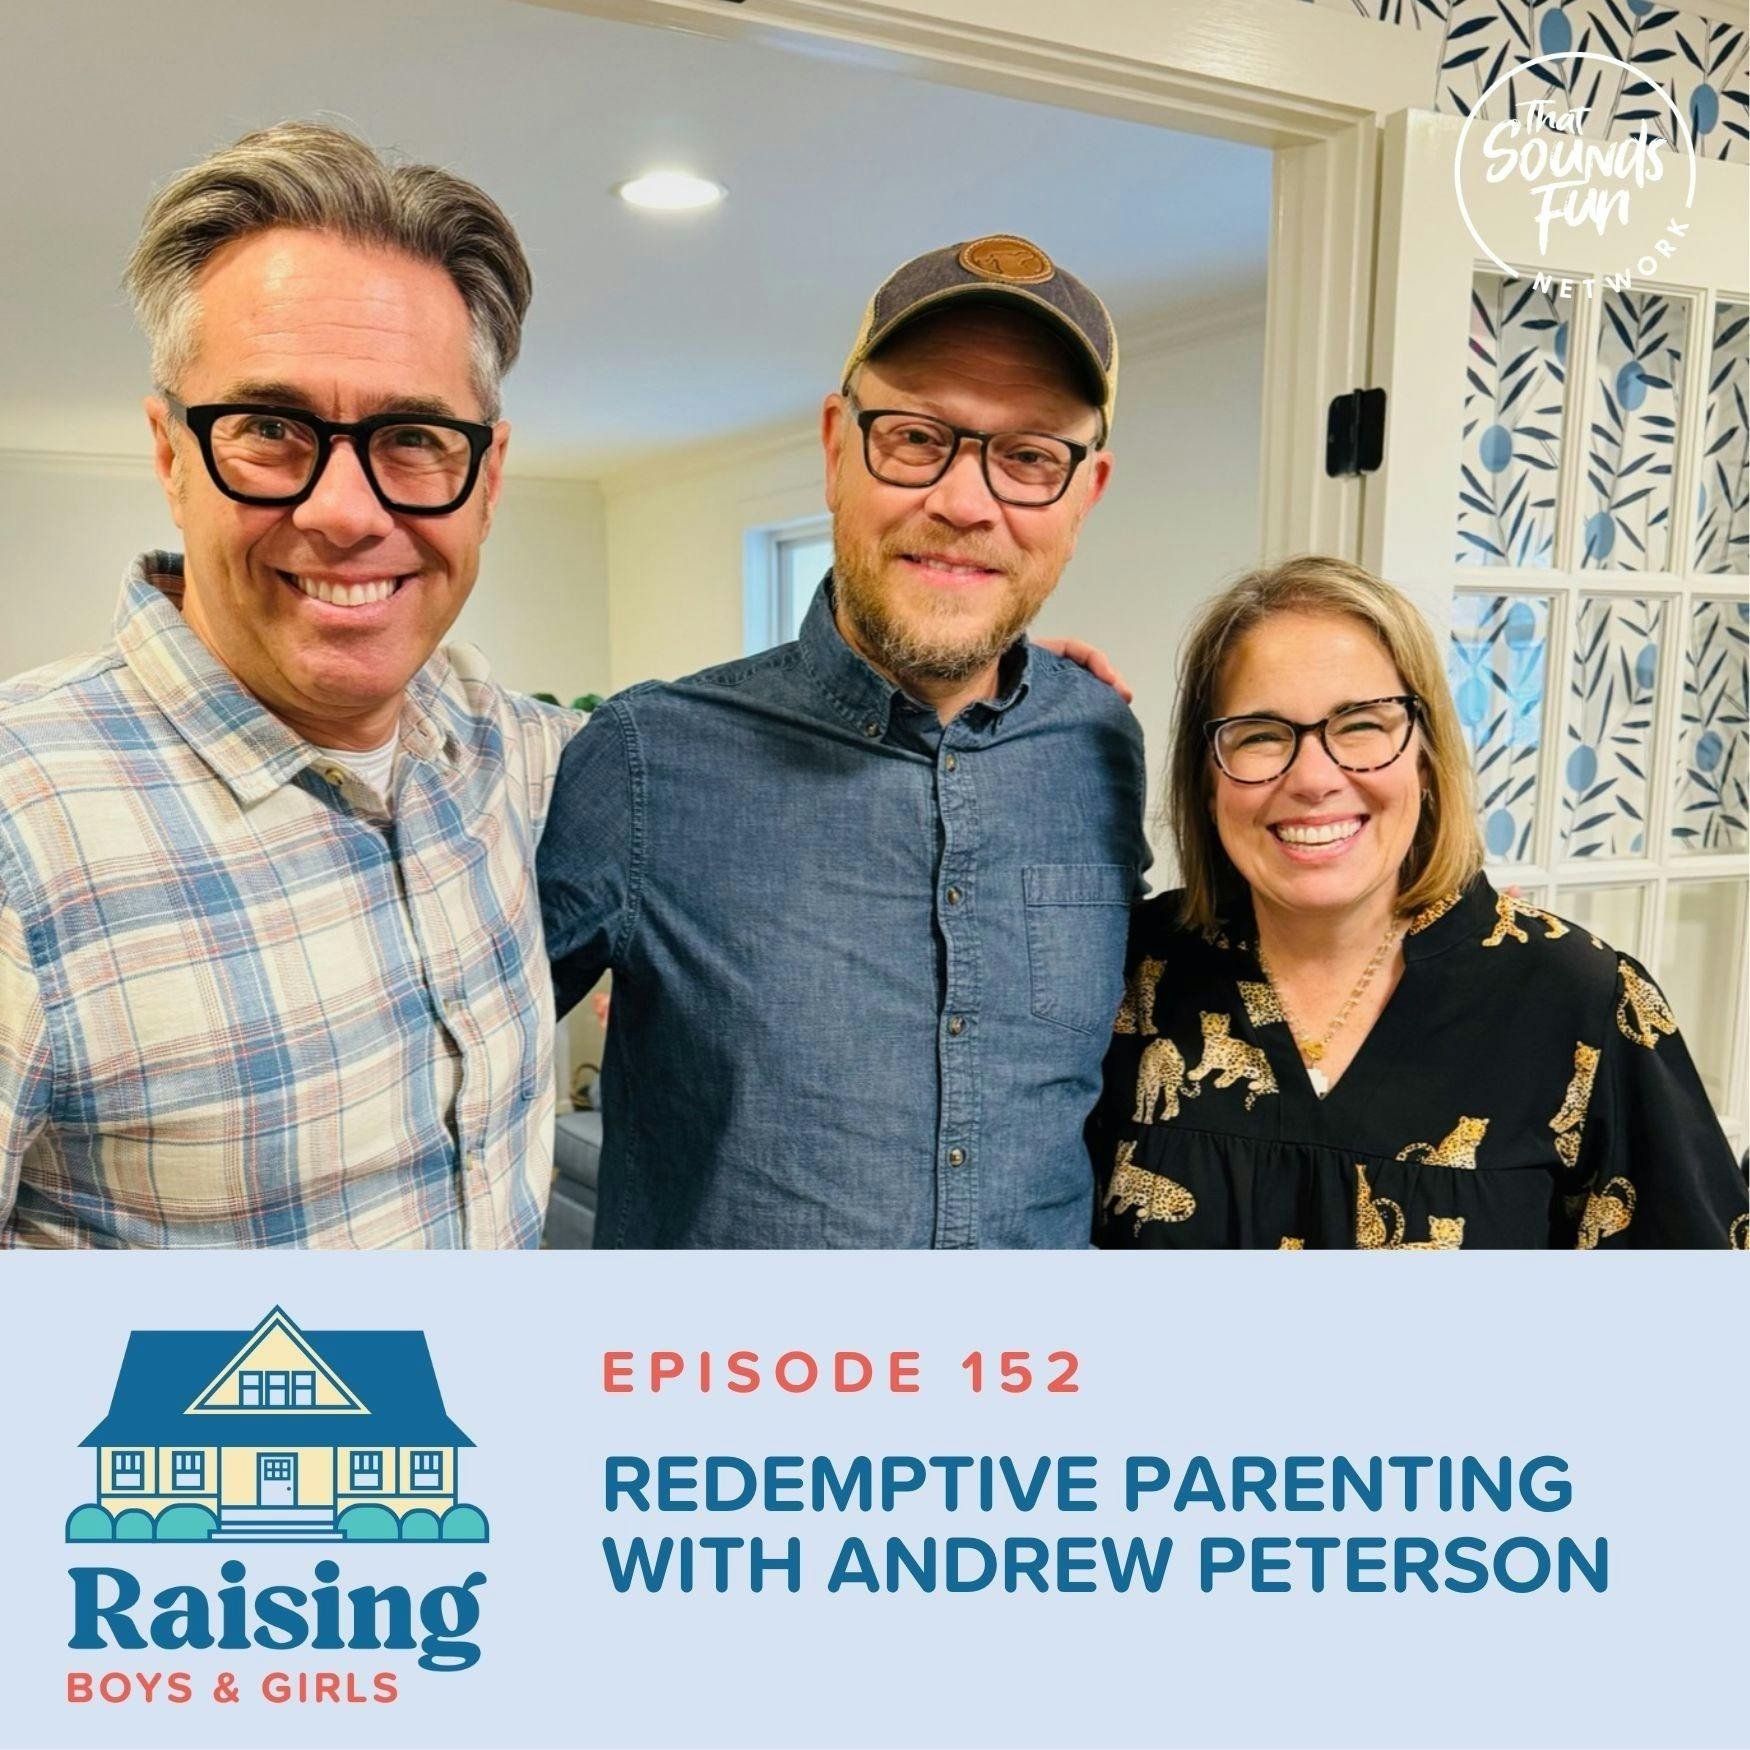 Episode 152: Redemptive Parenting with Andrew Peterson